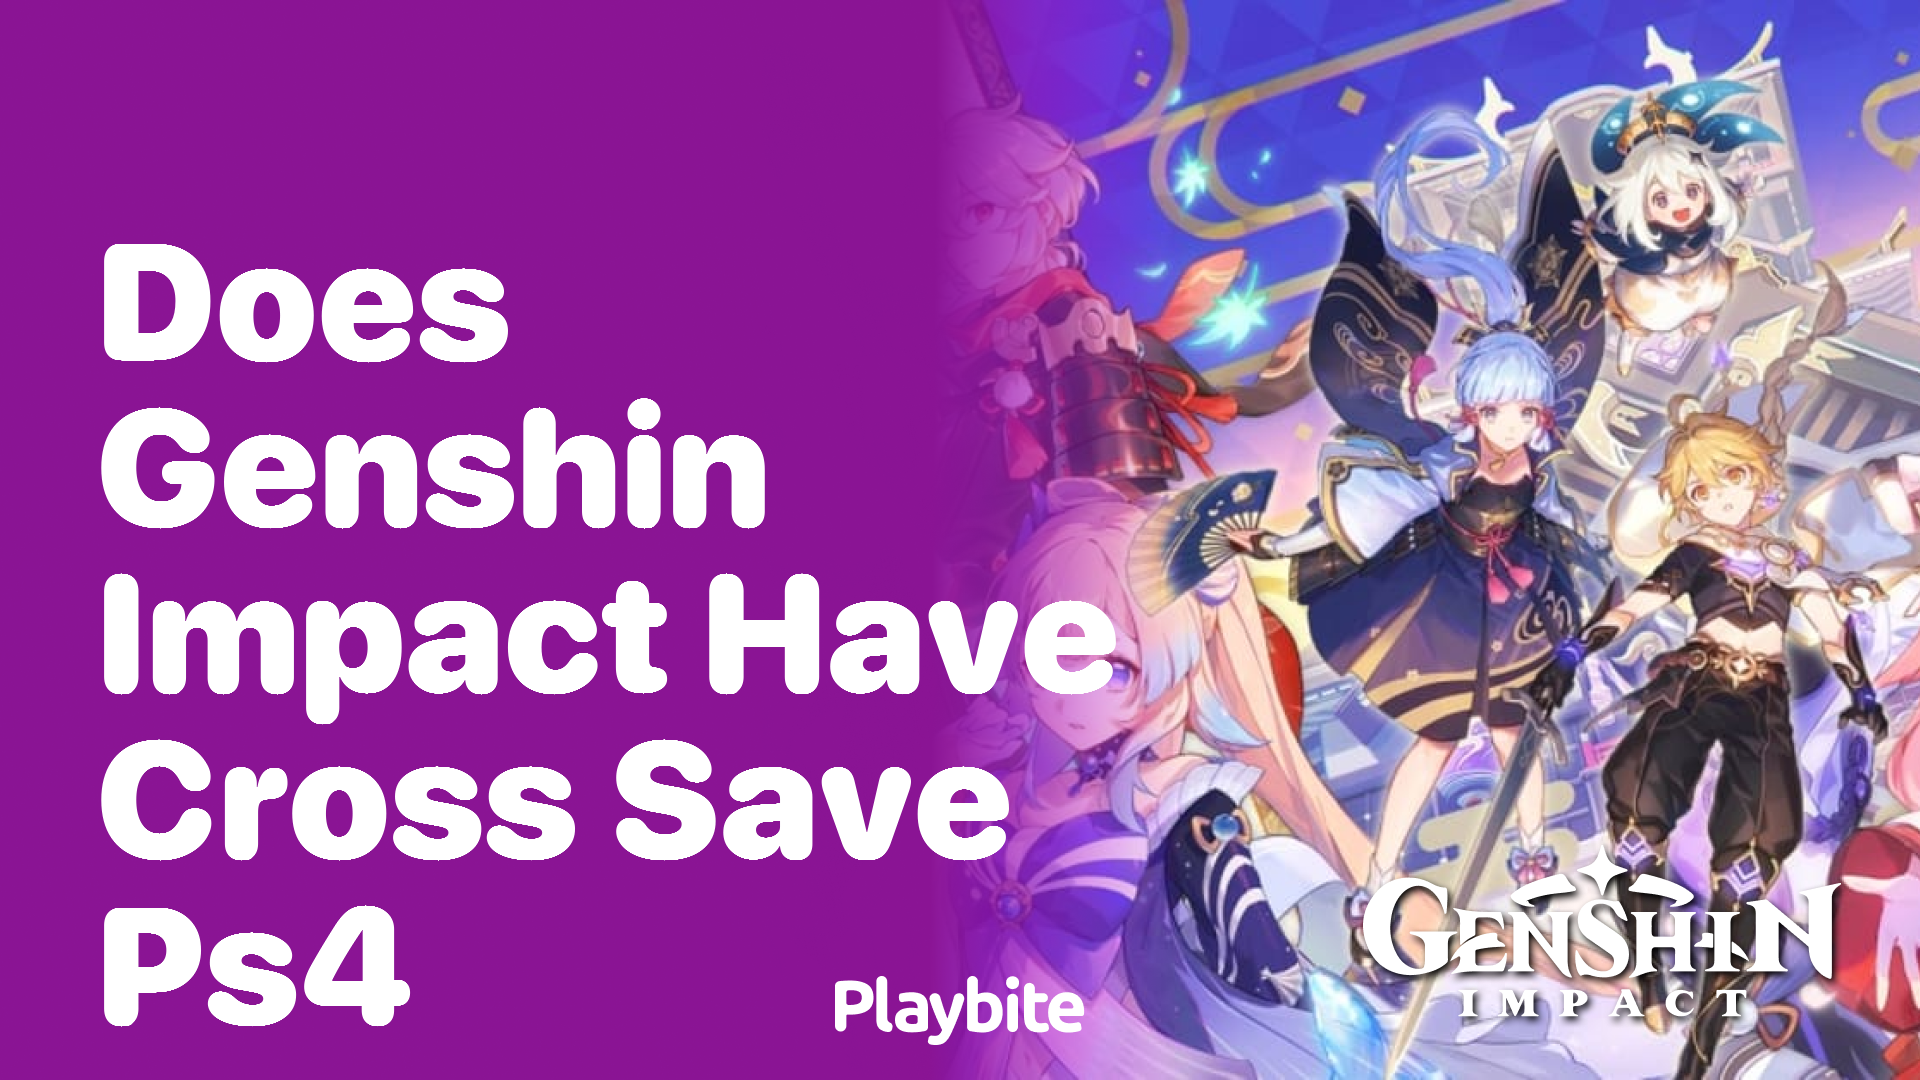 Does Genshin Impact have cross-platform play and cross-save?